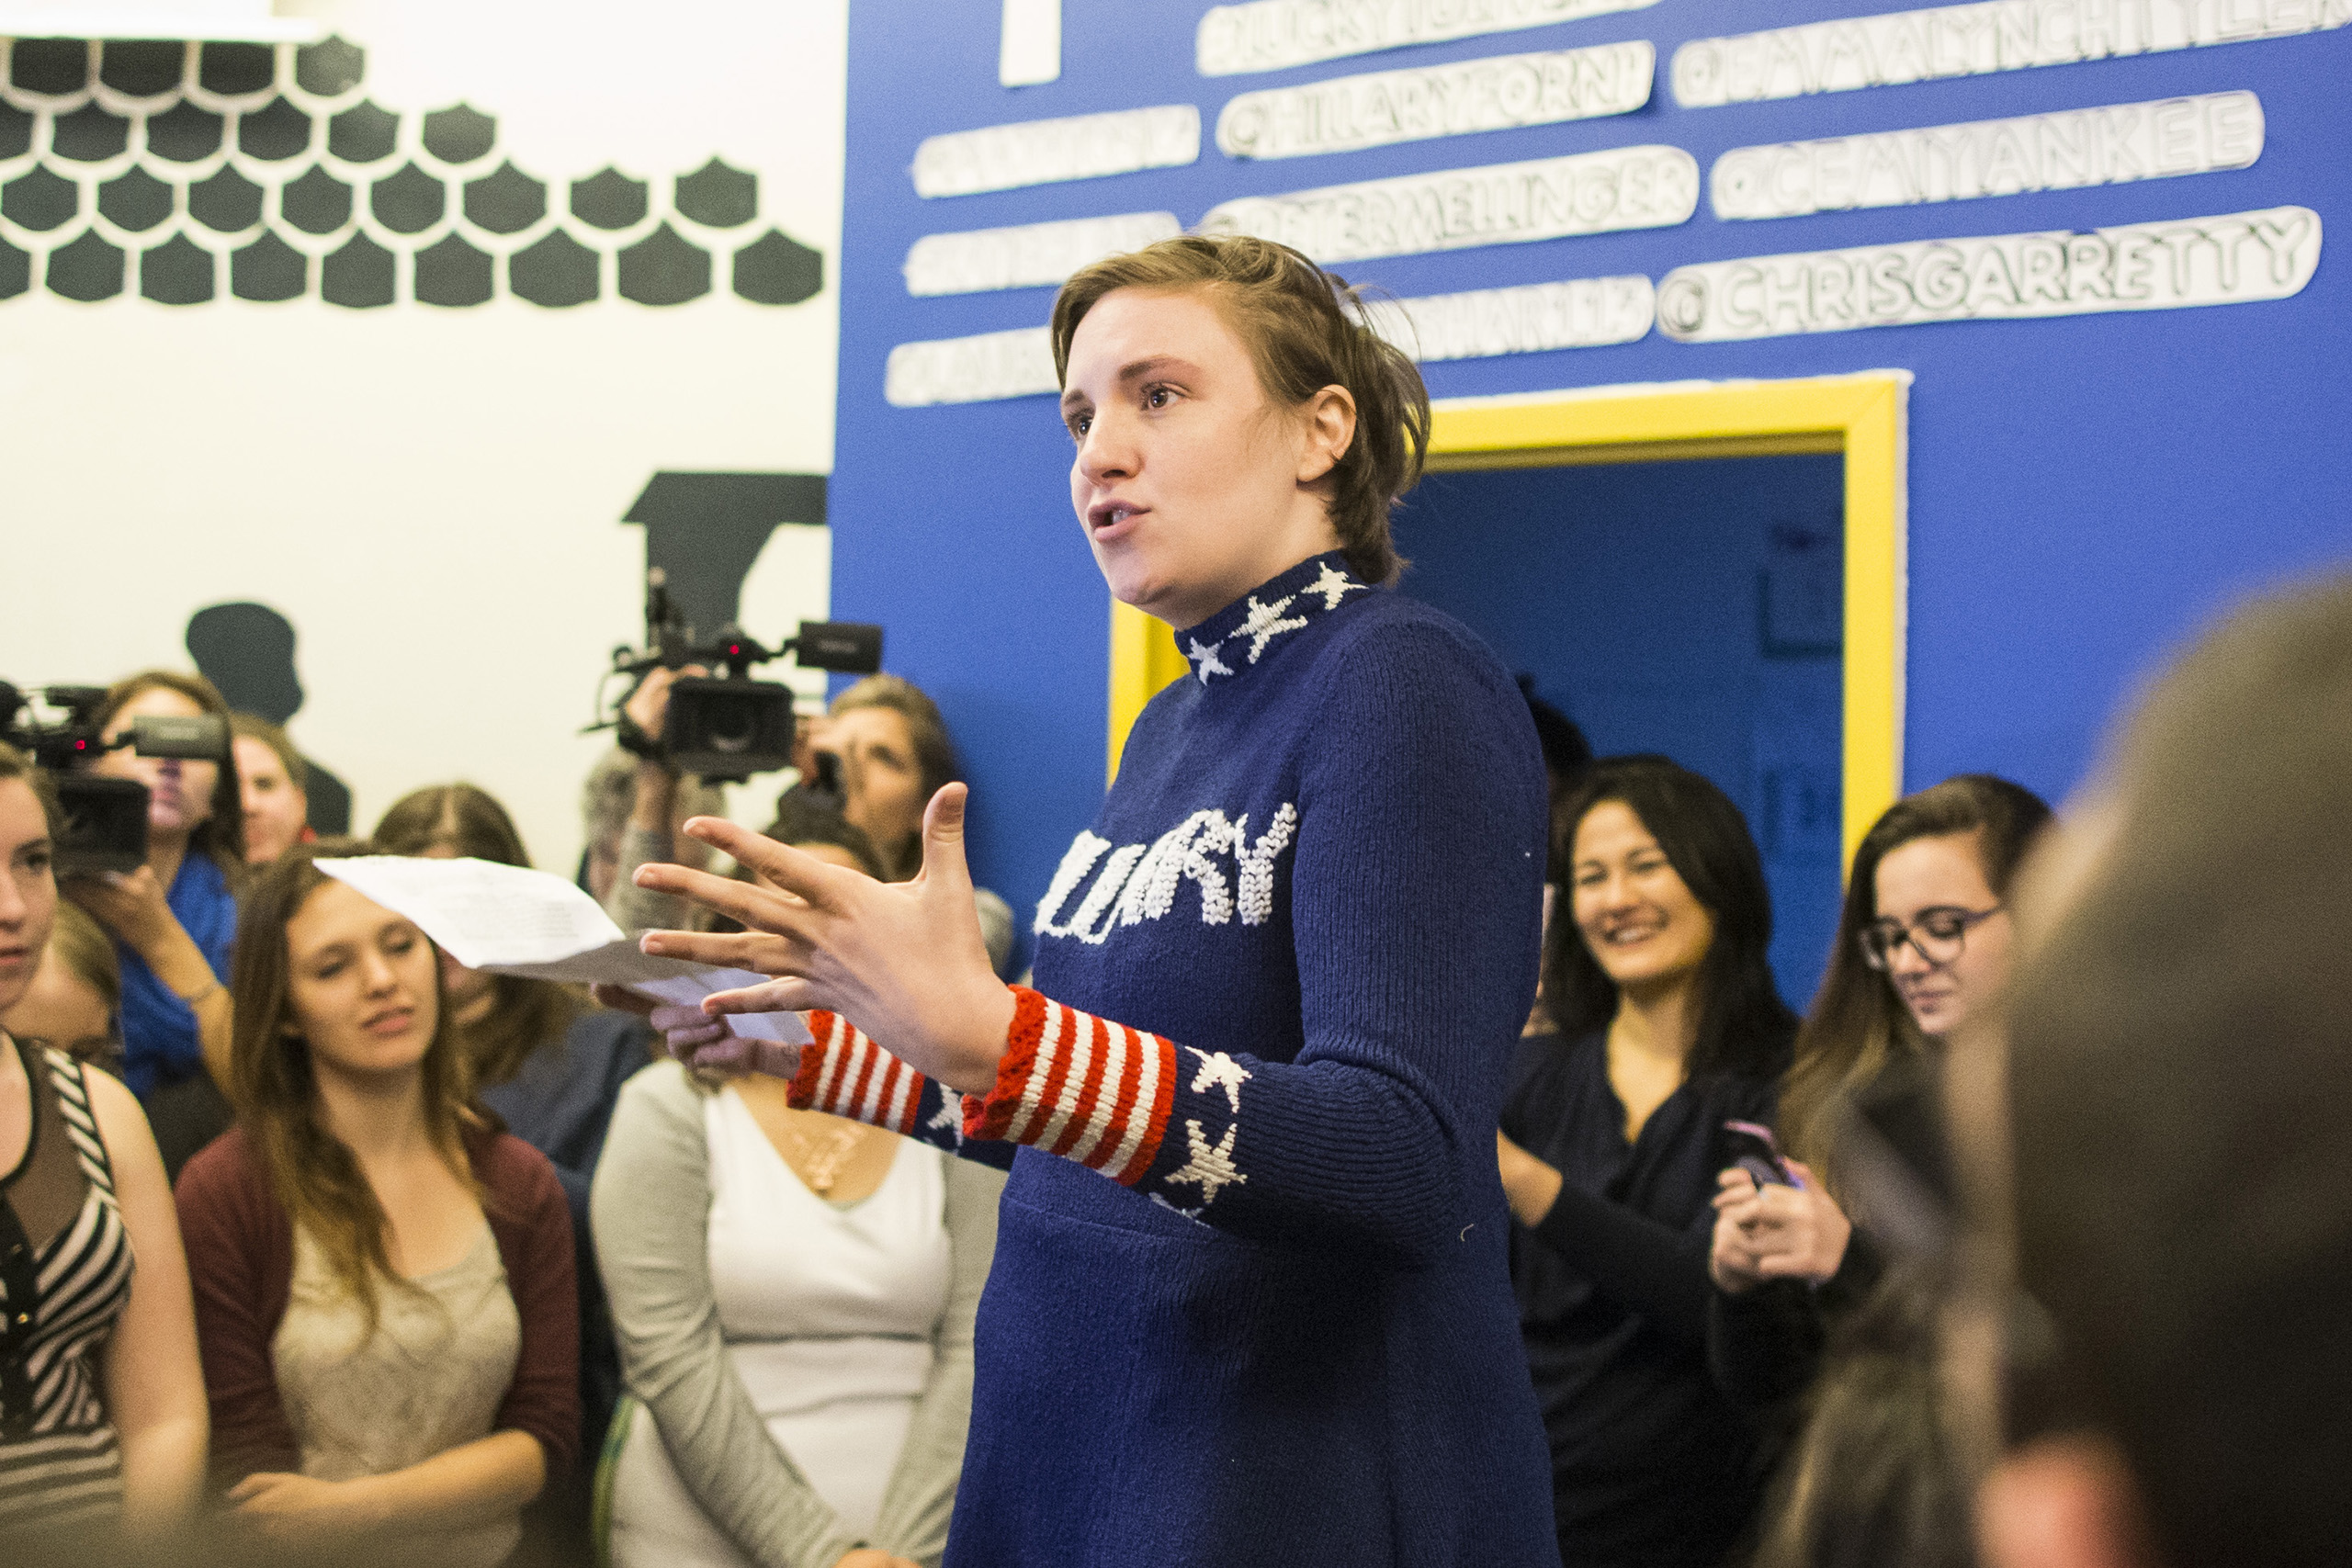 Lena Dunham speaks to a crowd at a Hillary Clinton campaign office in Manchester, N.H., on Jan. 8, 2016 (Scott Eisen—Getty Images)